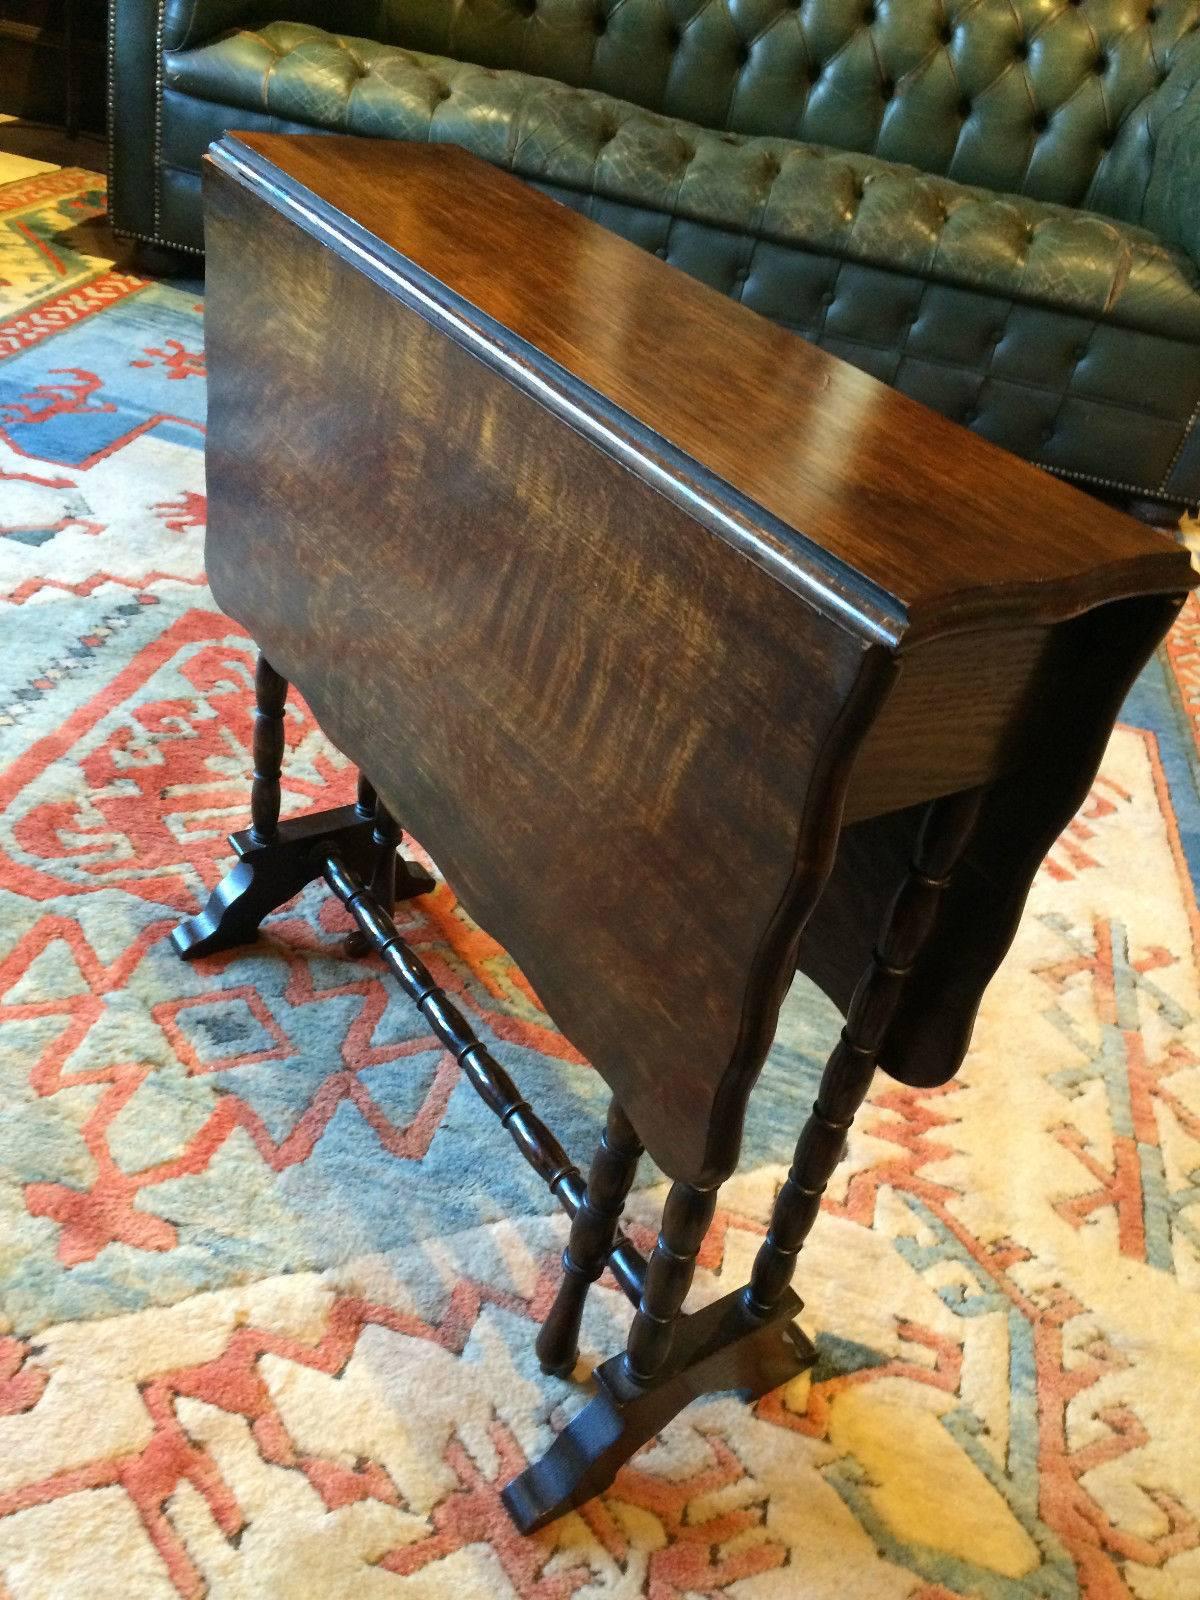 Antique 19th century Victorian cottage style drop-leaf side table, rectangular scalloped top with two drop leaves over cotton real legs with two pull-out legs on casters, lovely aged wood with glorious patina.